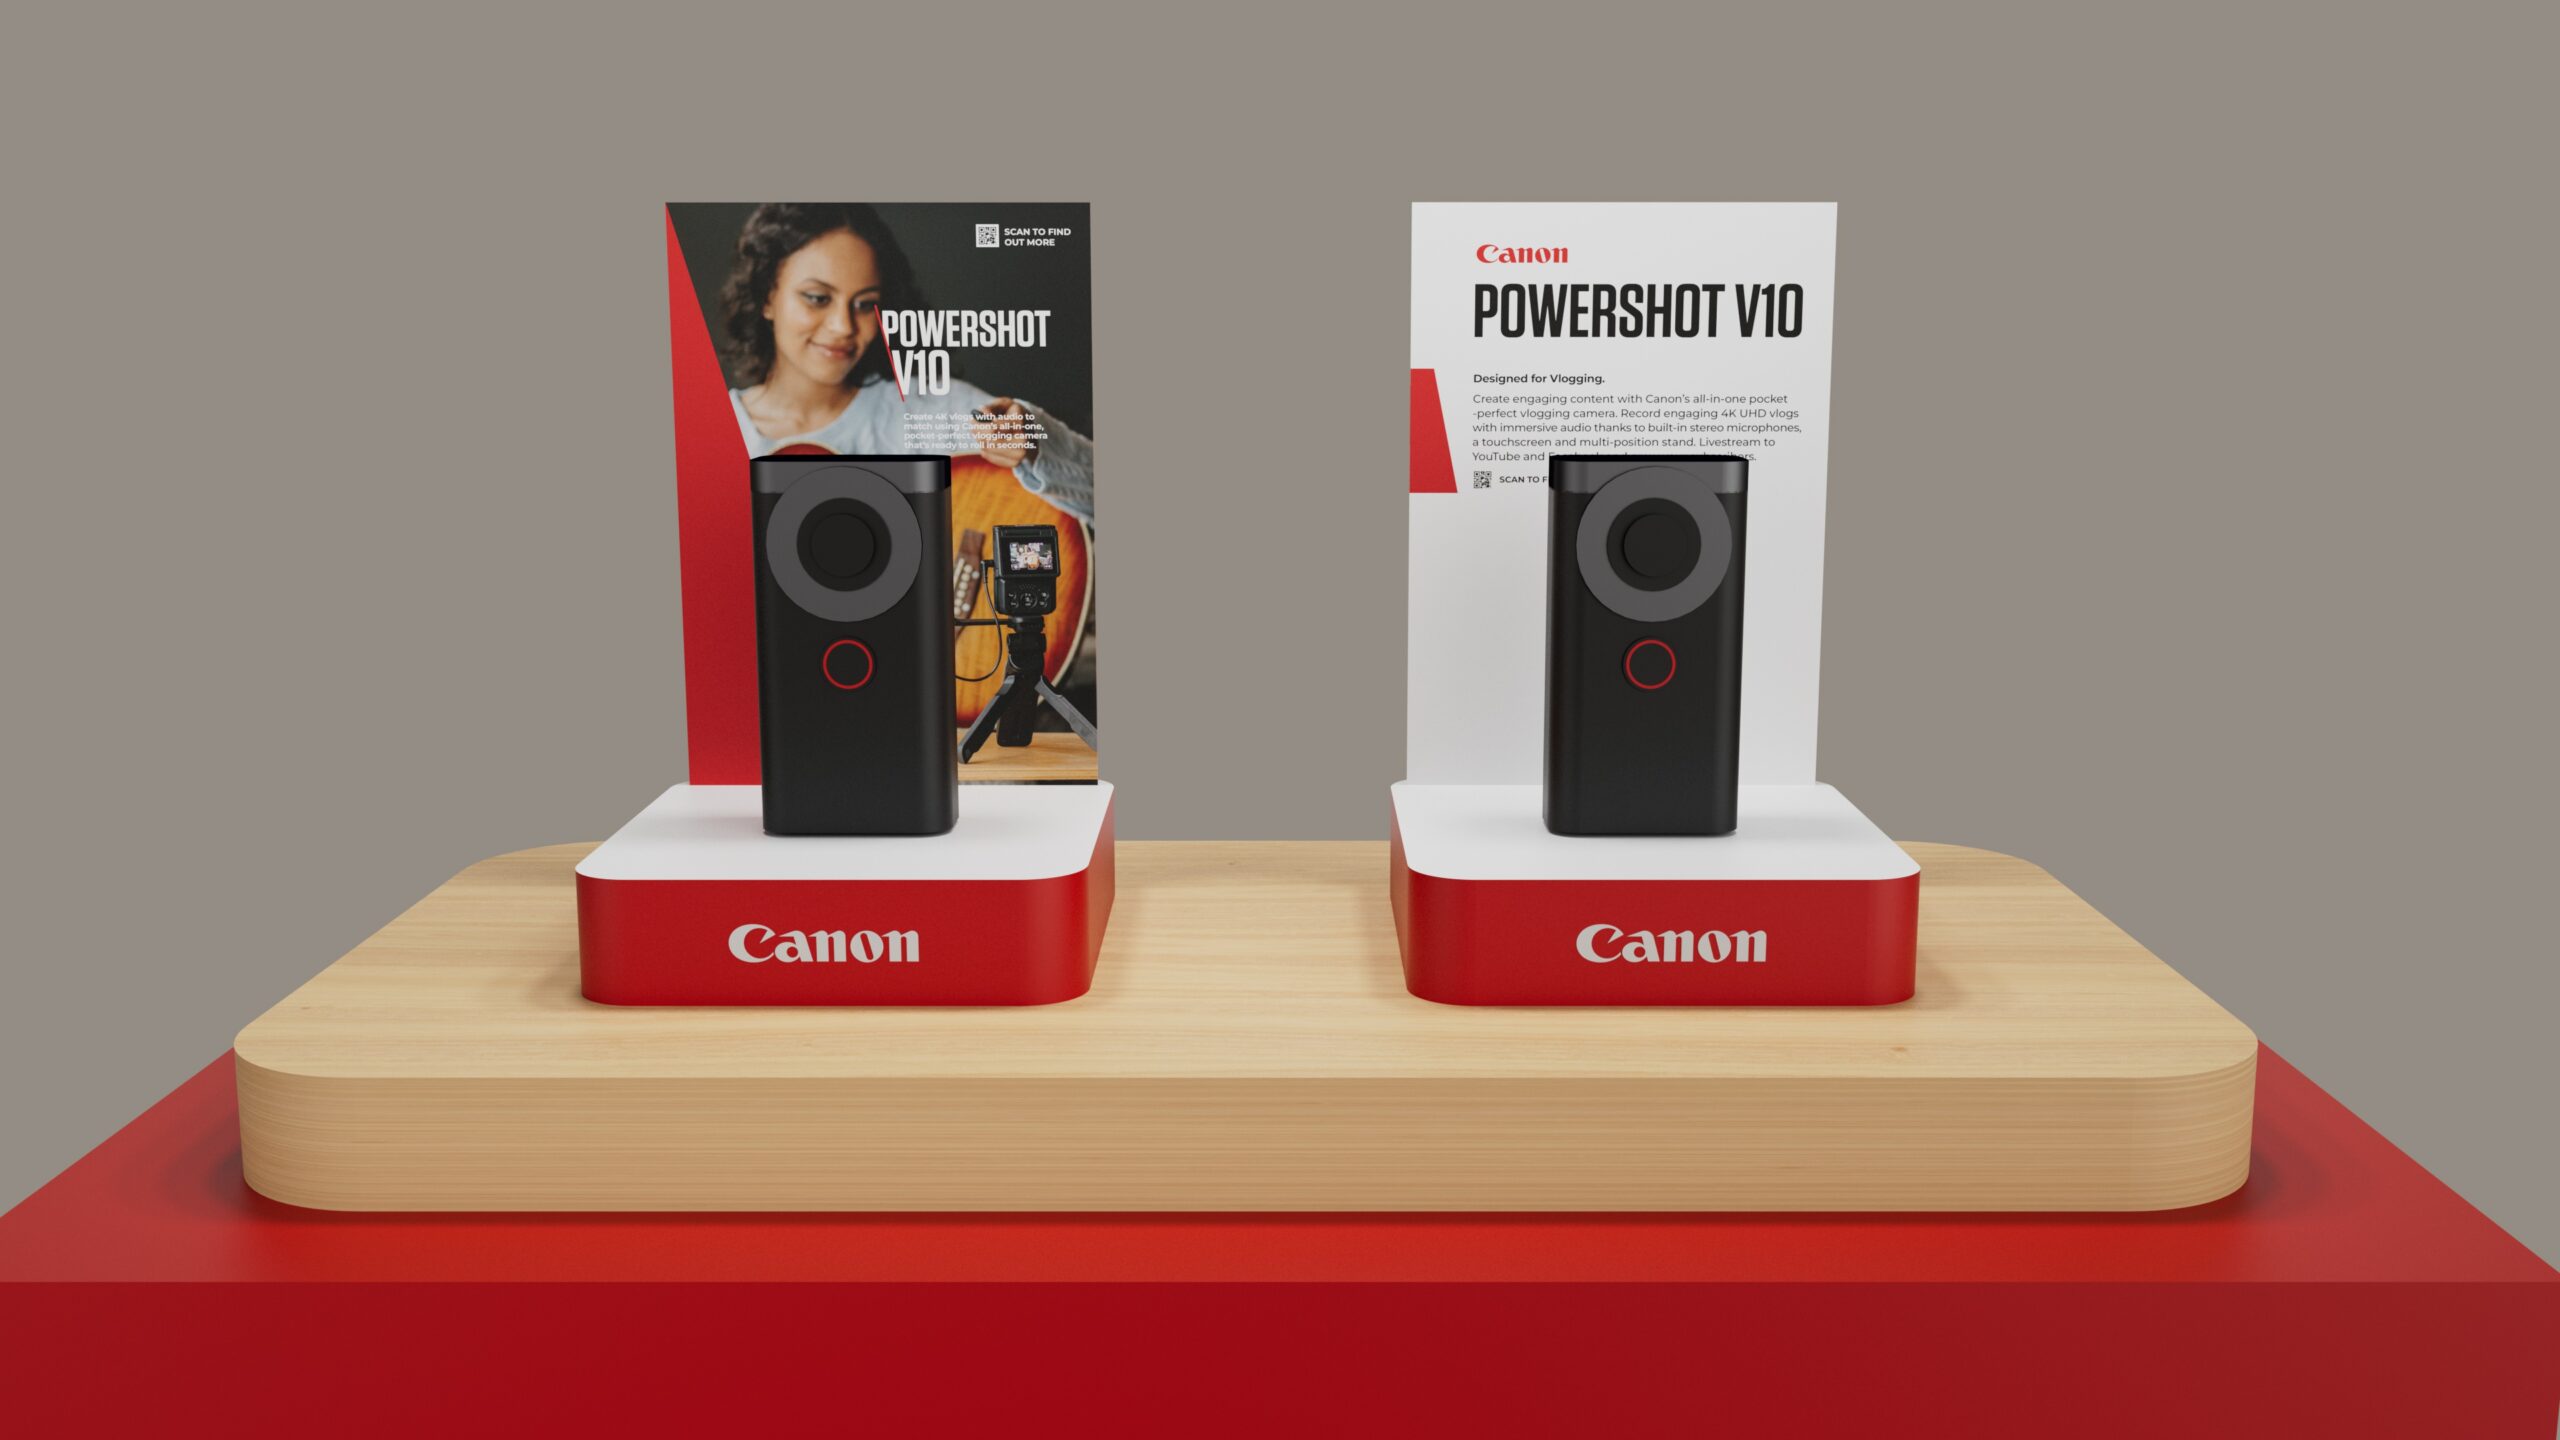 CAN08154_Canon_Retail_Refresh_Plinths_only_test_V10_MASS